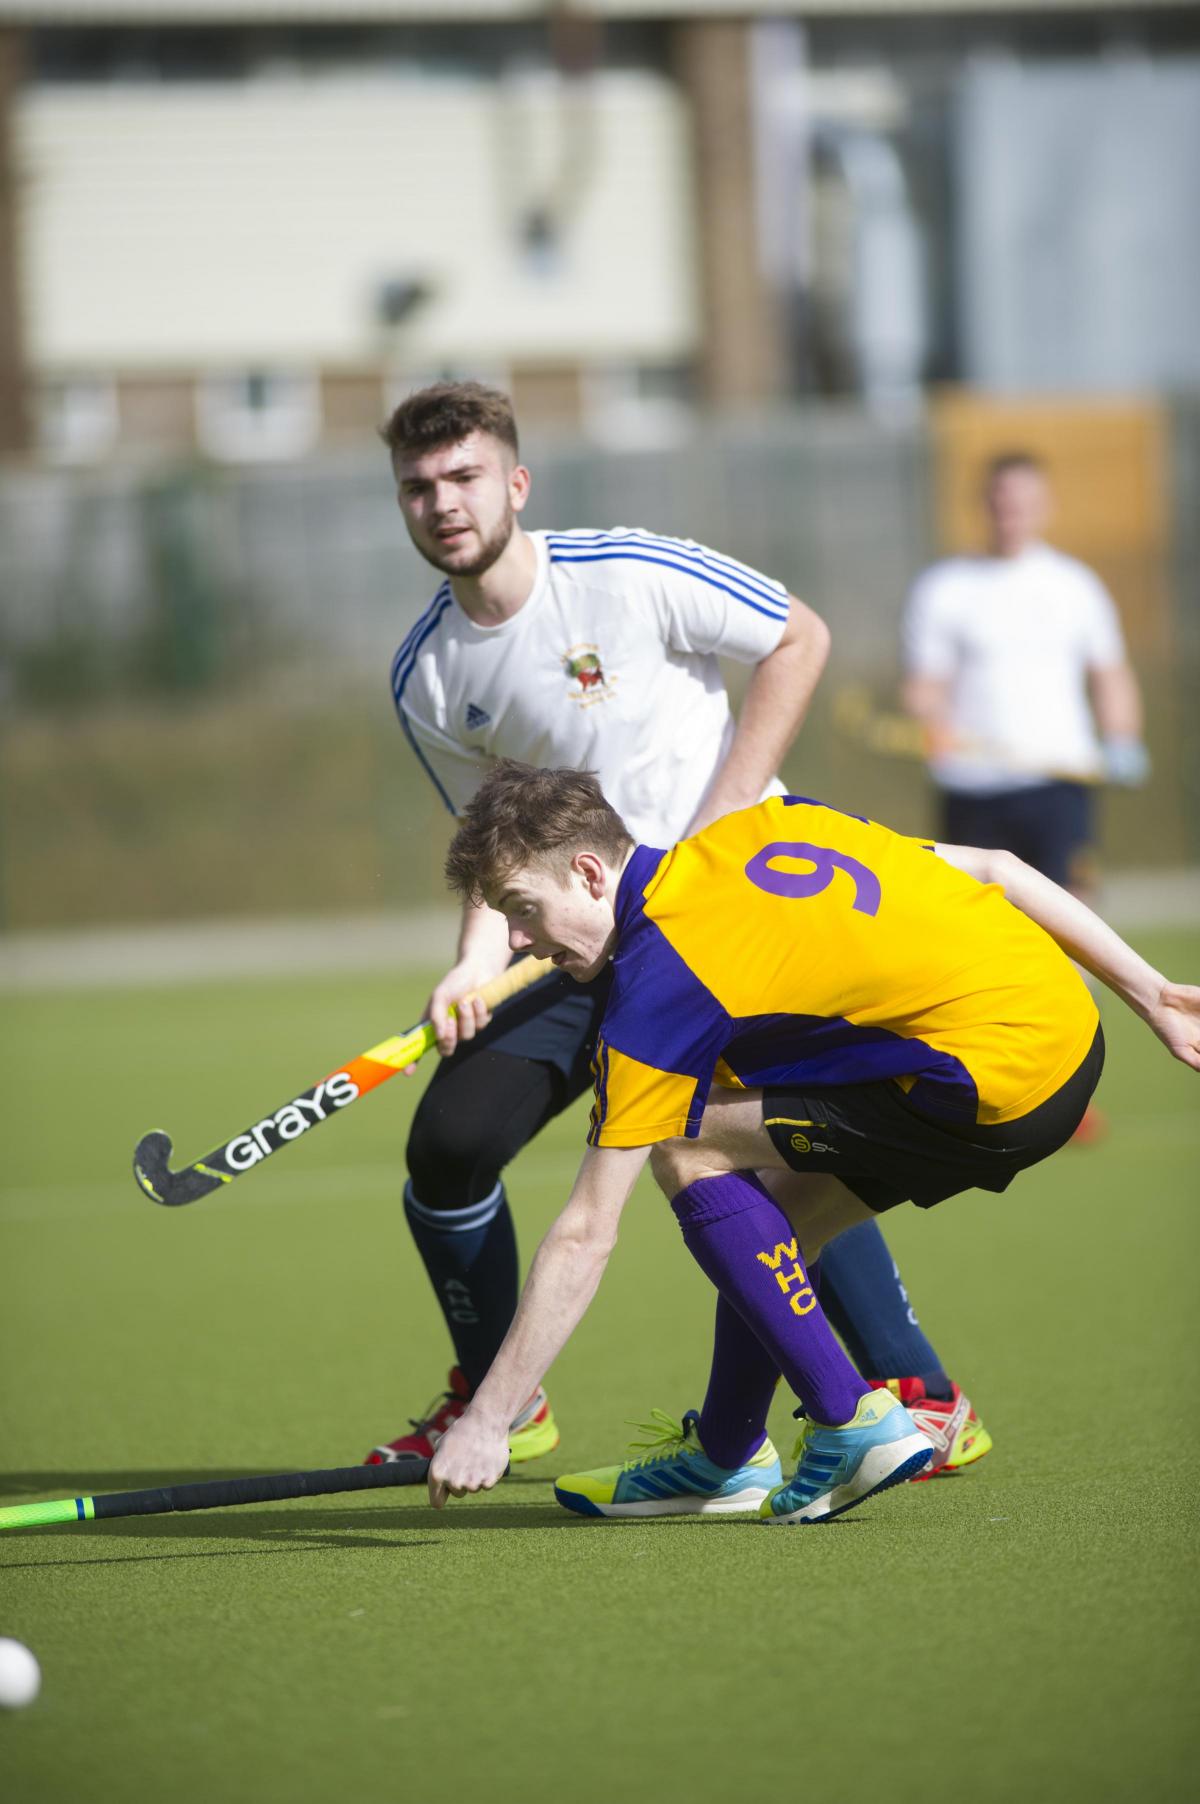 Action for Andover Men's 1st team hockey 3-5 defeat to Winchester - Picture Daniel Murphy